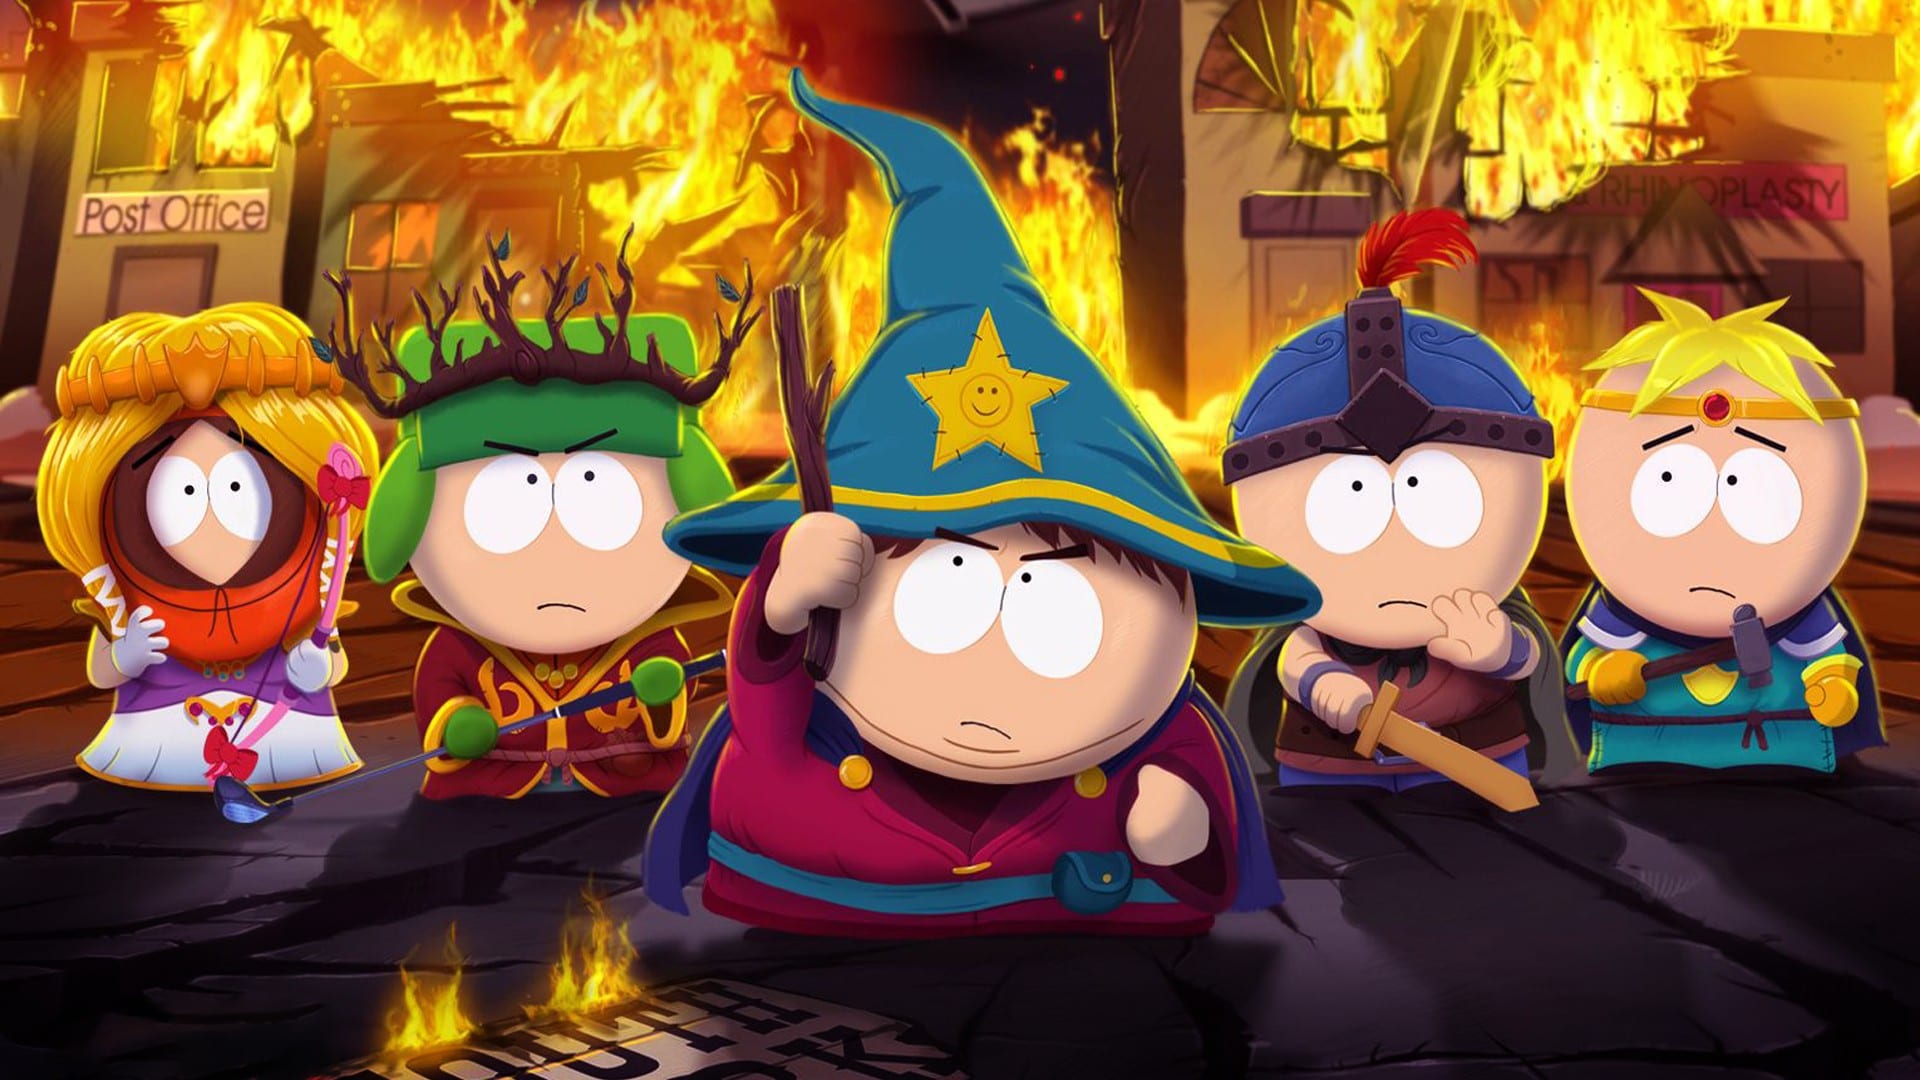 Microsoft Xbox One Game: South Park The Stick of Truth